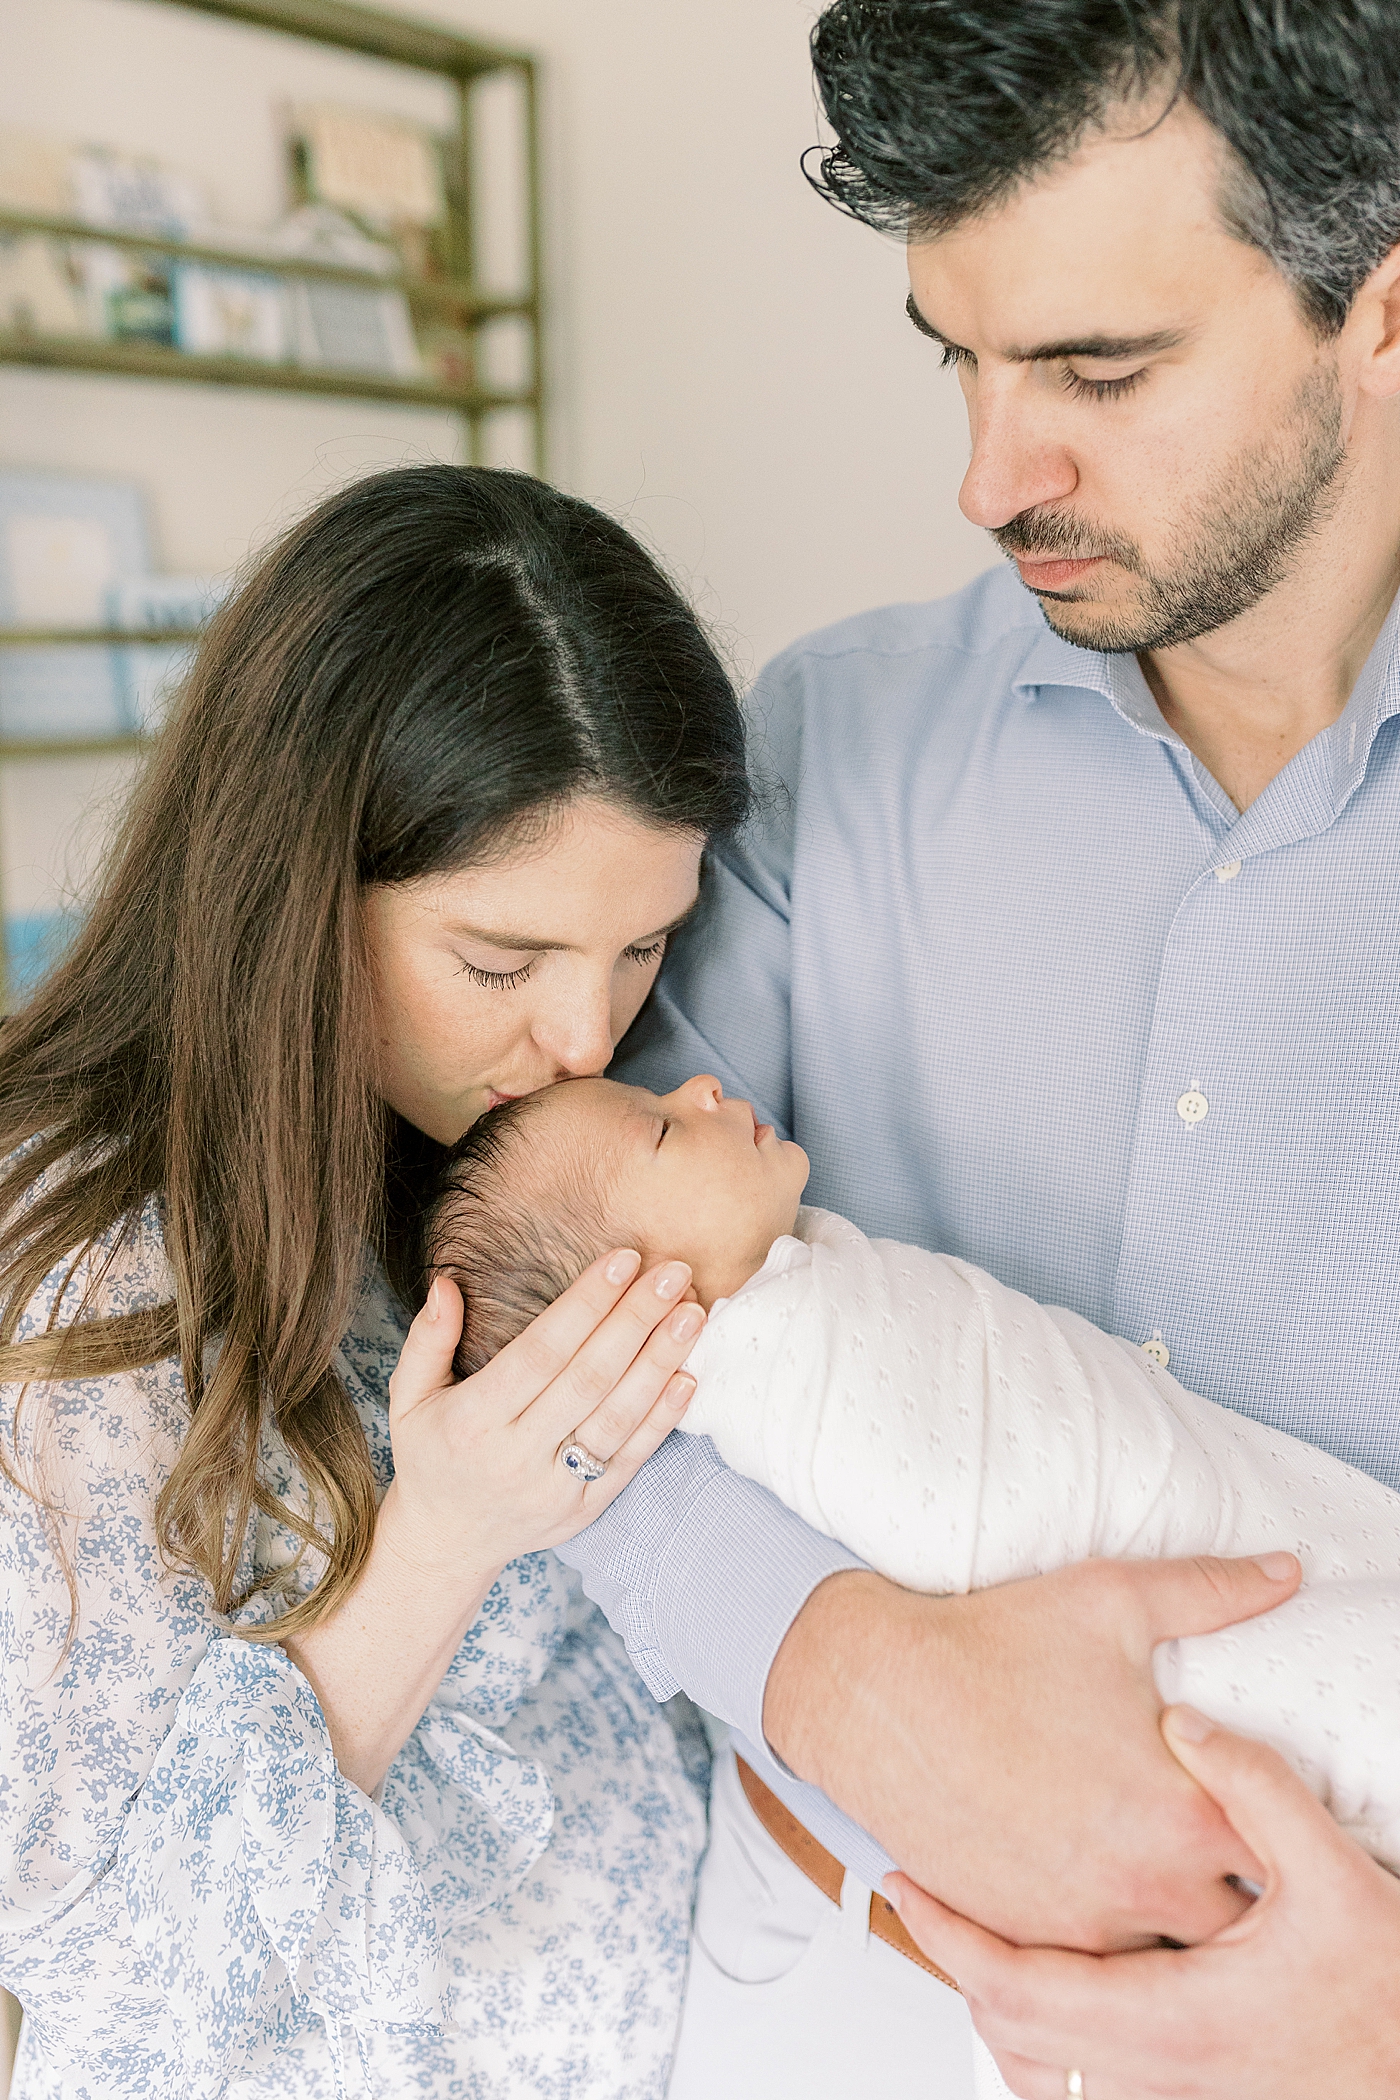 Dad holding newborn while mom kisses him on the head | Photo by Mount Pleasant Newborn Photographer Caitlyn Motycka